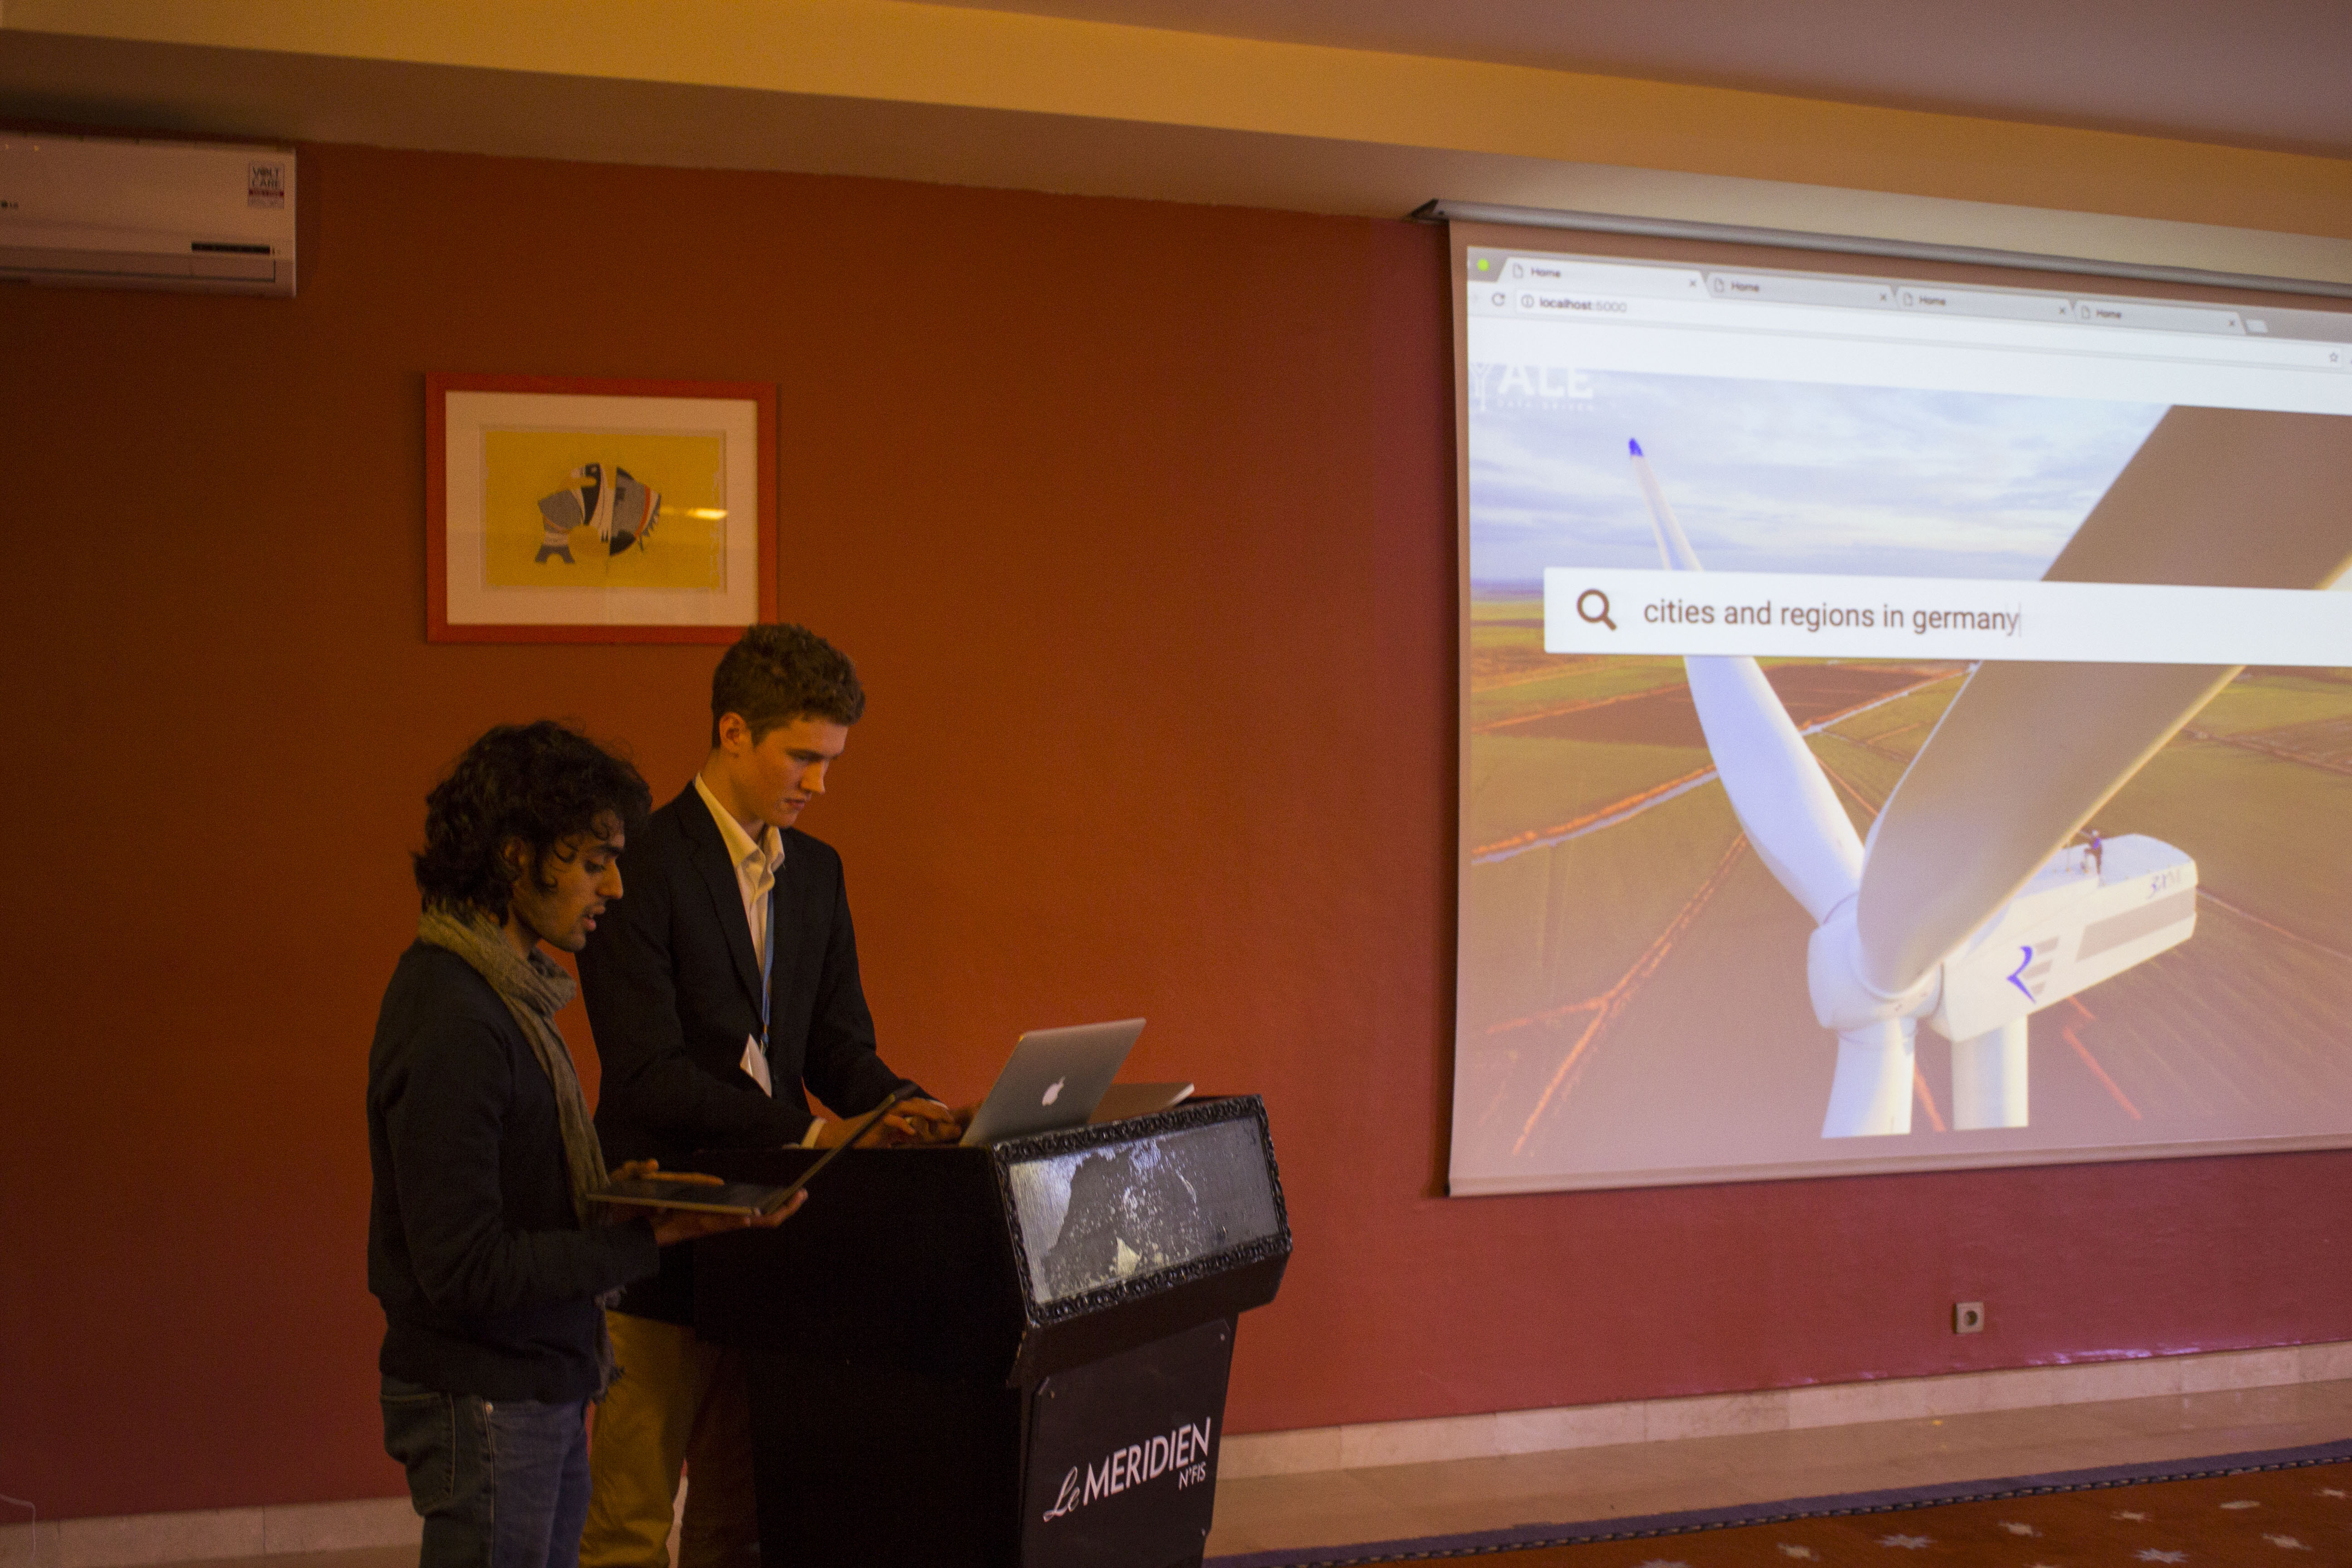 Data-Driven student researchers Aadit Gupta and Ross Rauber demo a new tool for exploring climate action commitments.